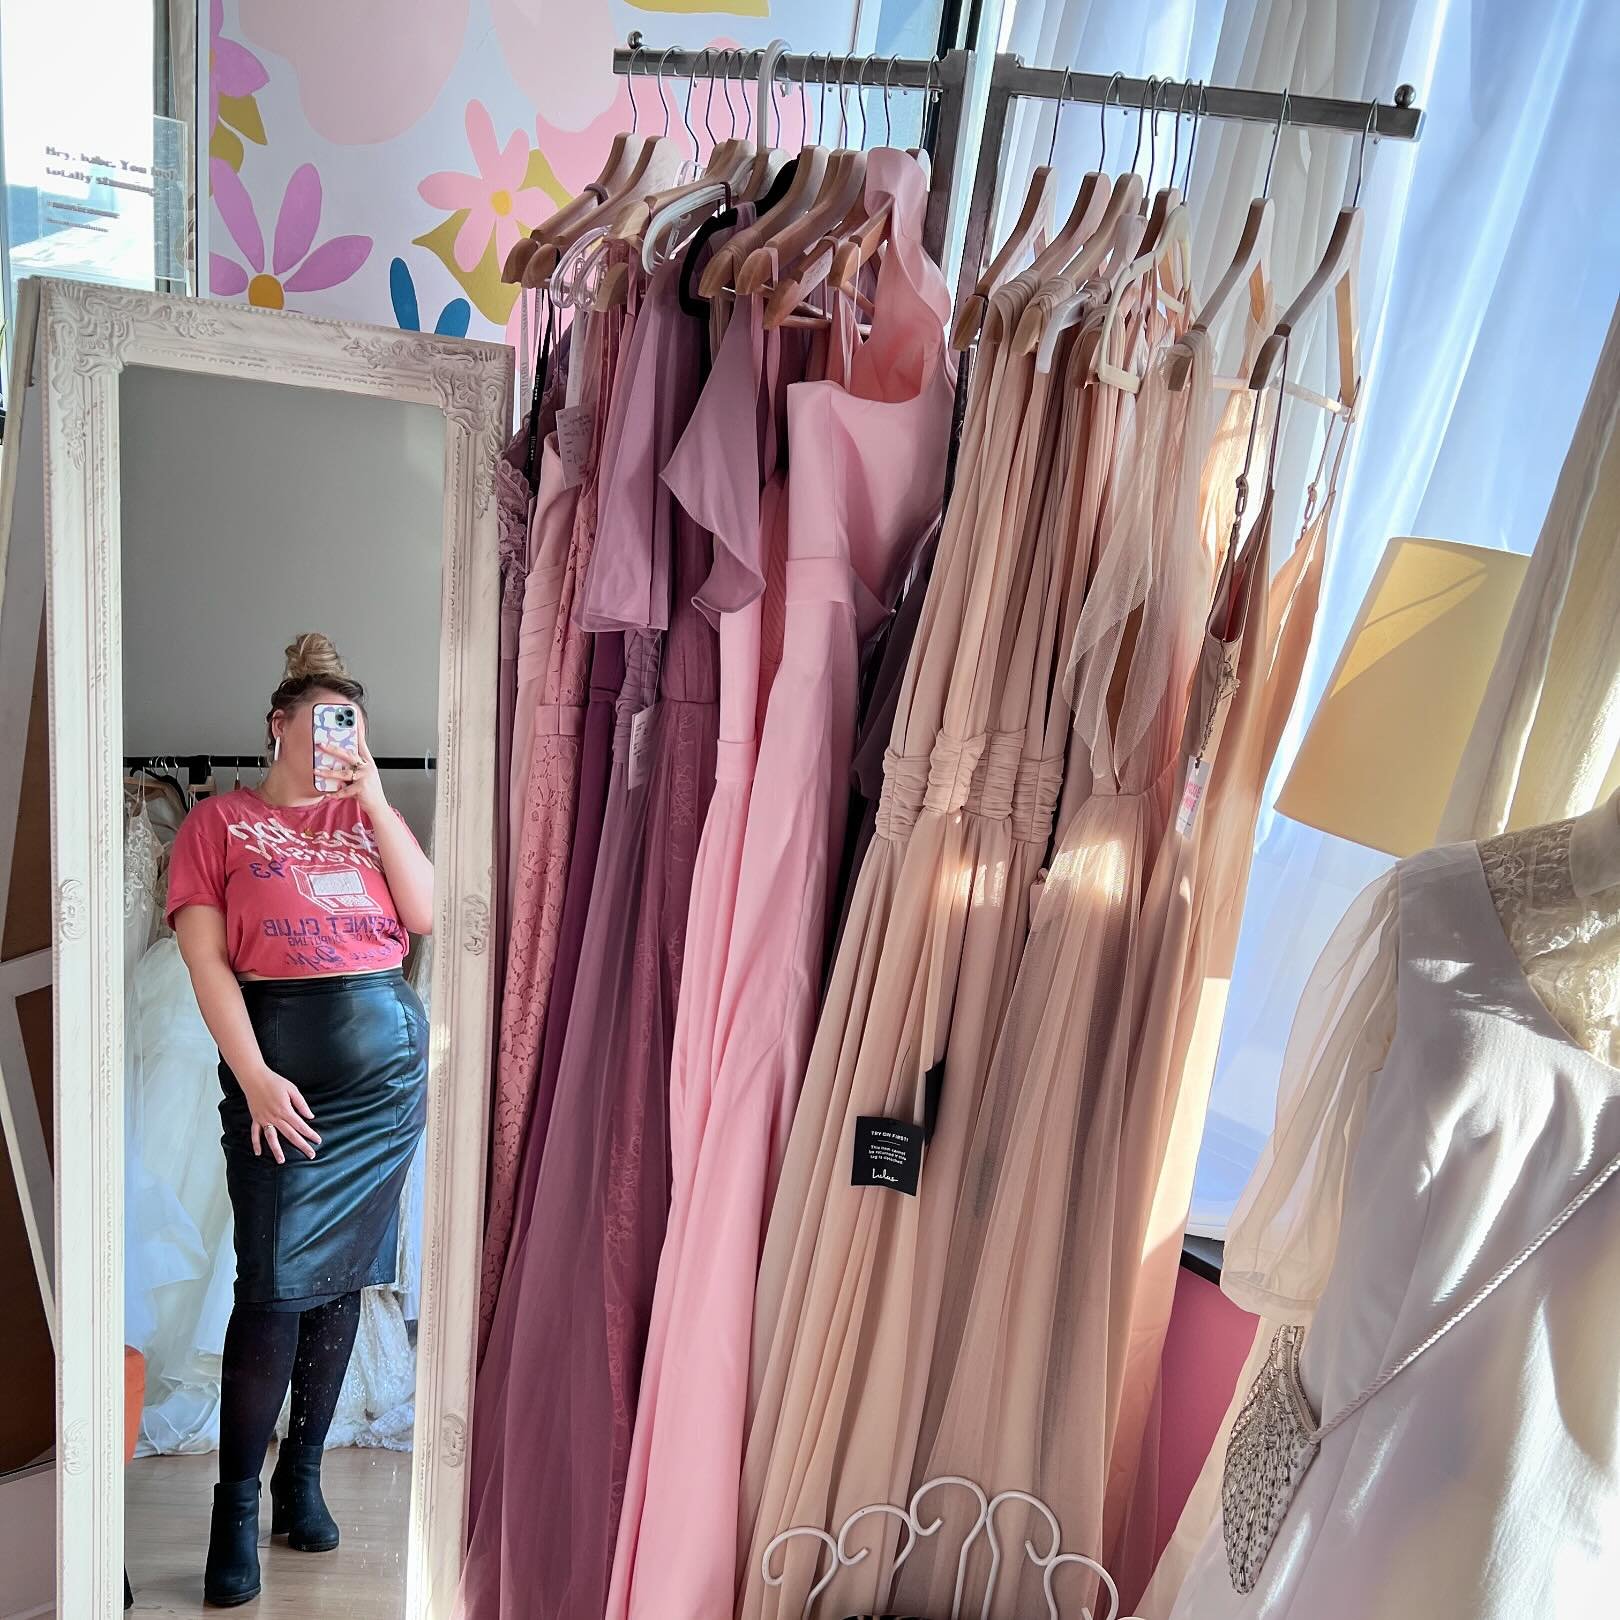 Important consignment update: 

Selling preowned formal gowns/ bridesmaid dresses was a dream that did not work. 
I have been working behind the scenes to navigate the busy store schedule + bridal loft to have time to pack up our remaining consignmen